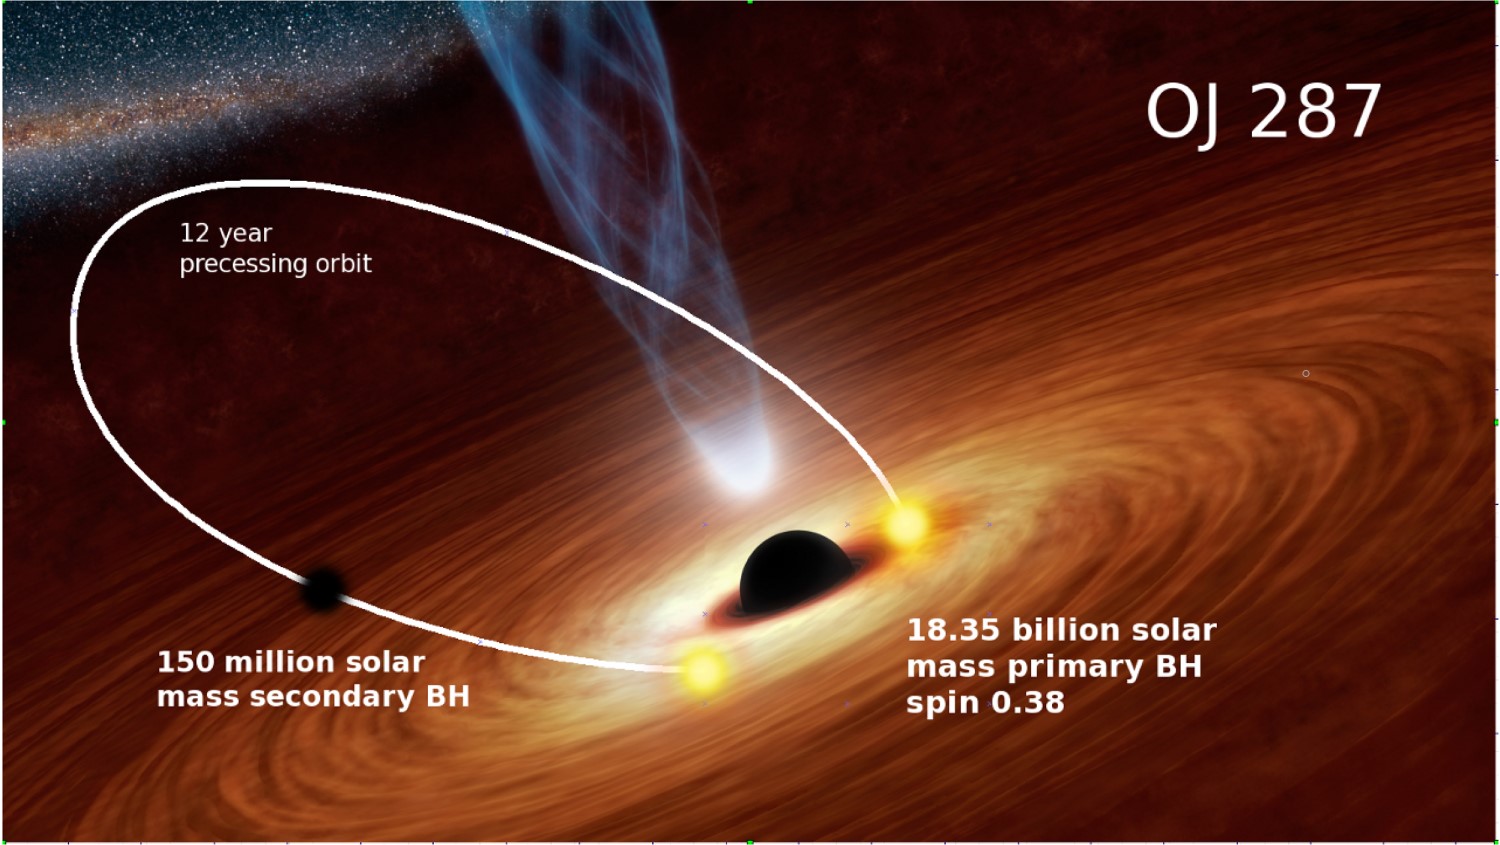 Flare of light brighter than a trillion suns reveals location of rare double black hole galaxy